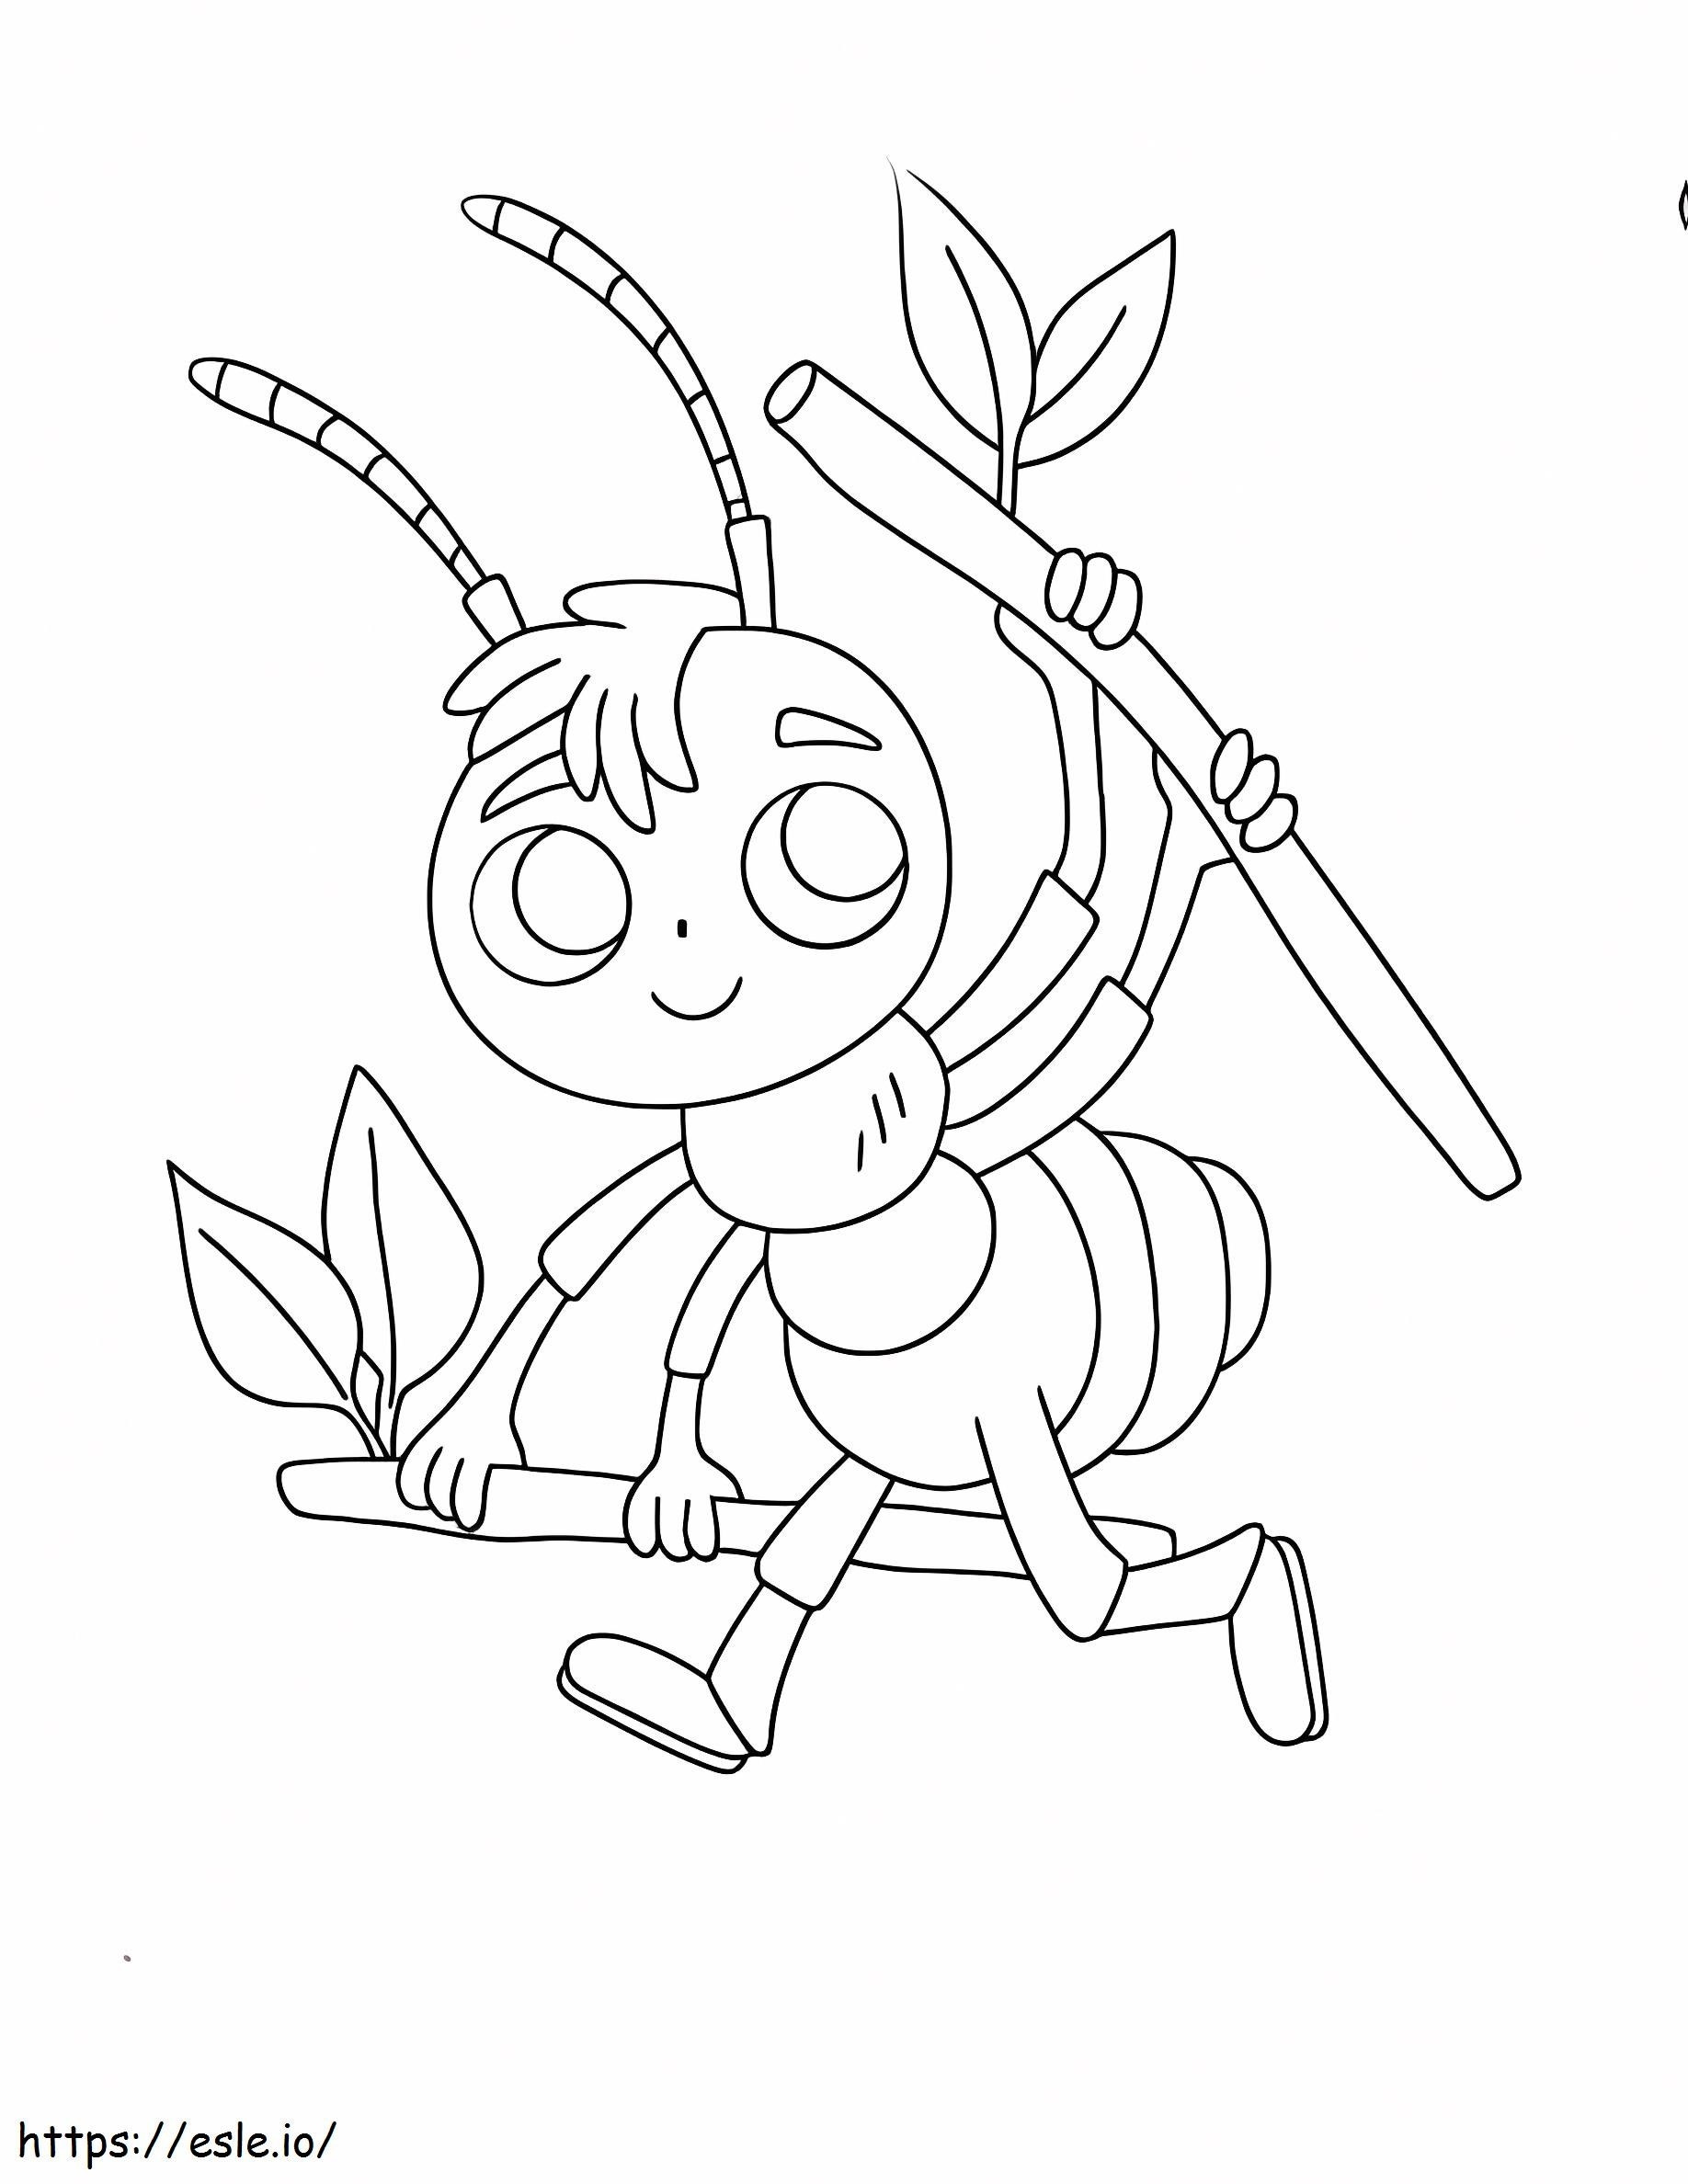 Ant Holding Tree Branch coloring page